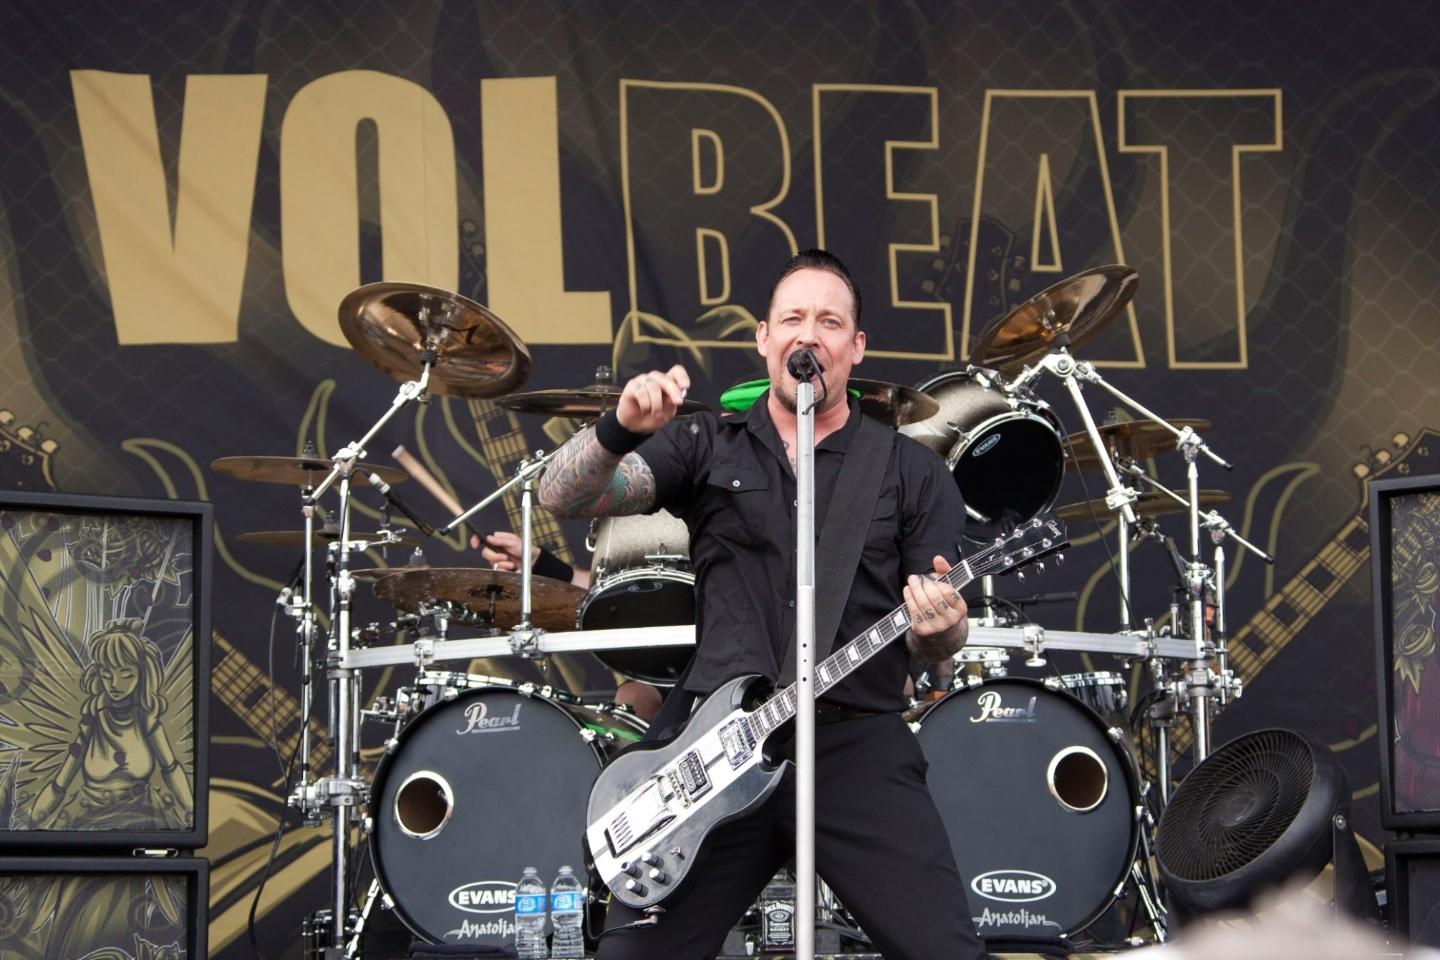 Volbeat Tickets Volbeat Tour 2019 and Concert Tickets viagogo